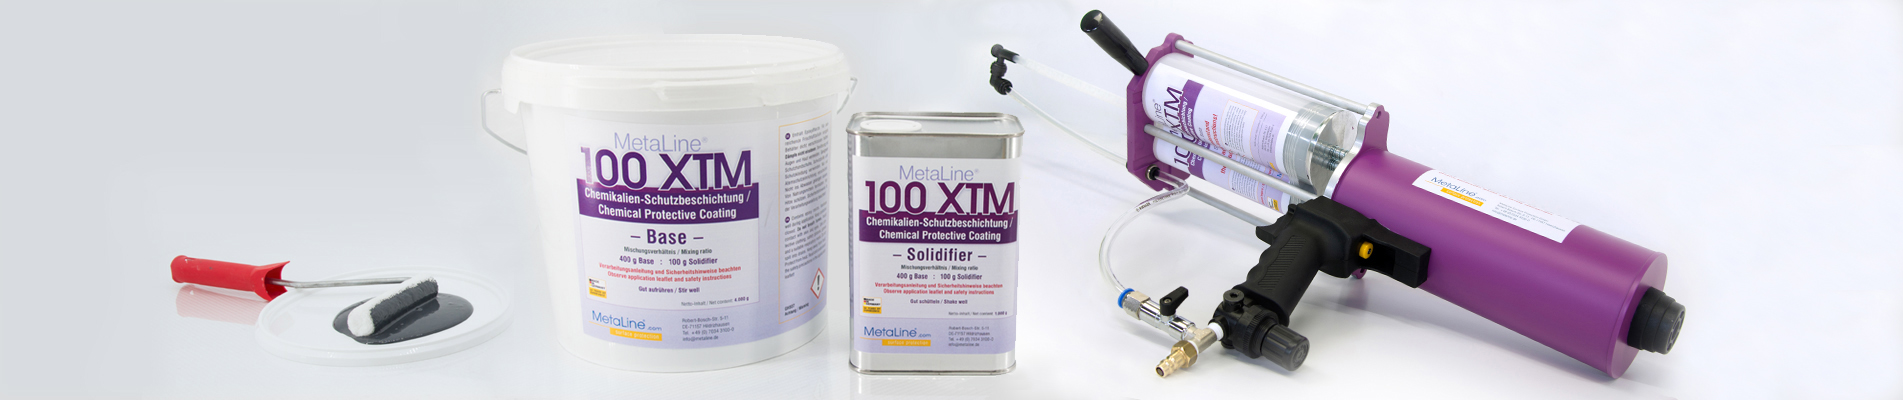 MetaLine 100 XTM chemical protection